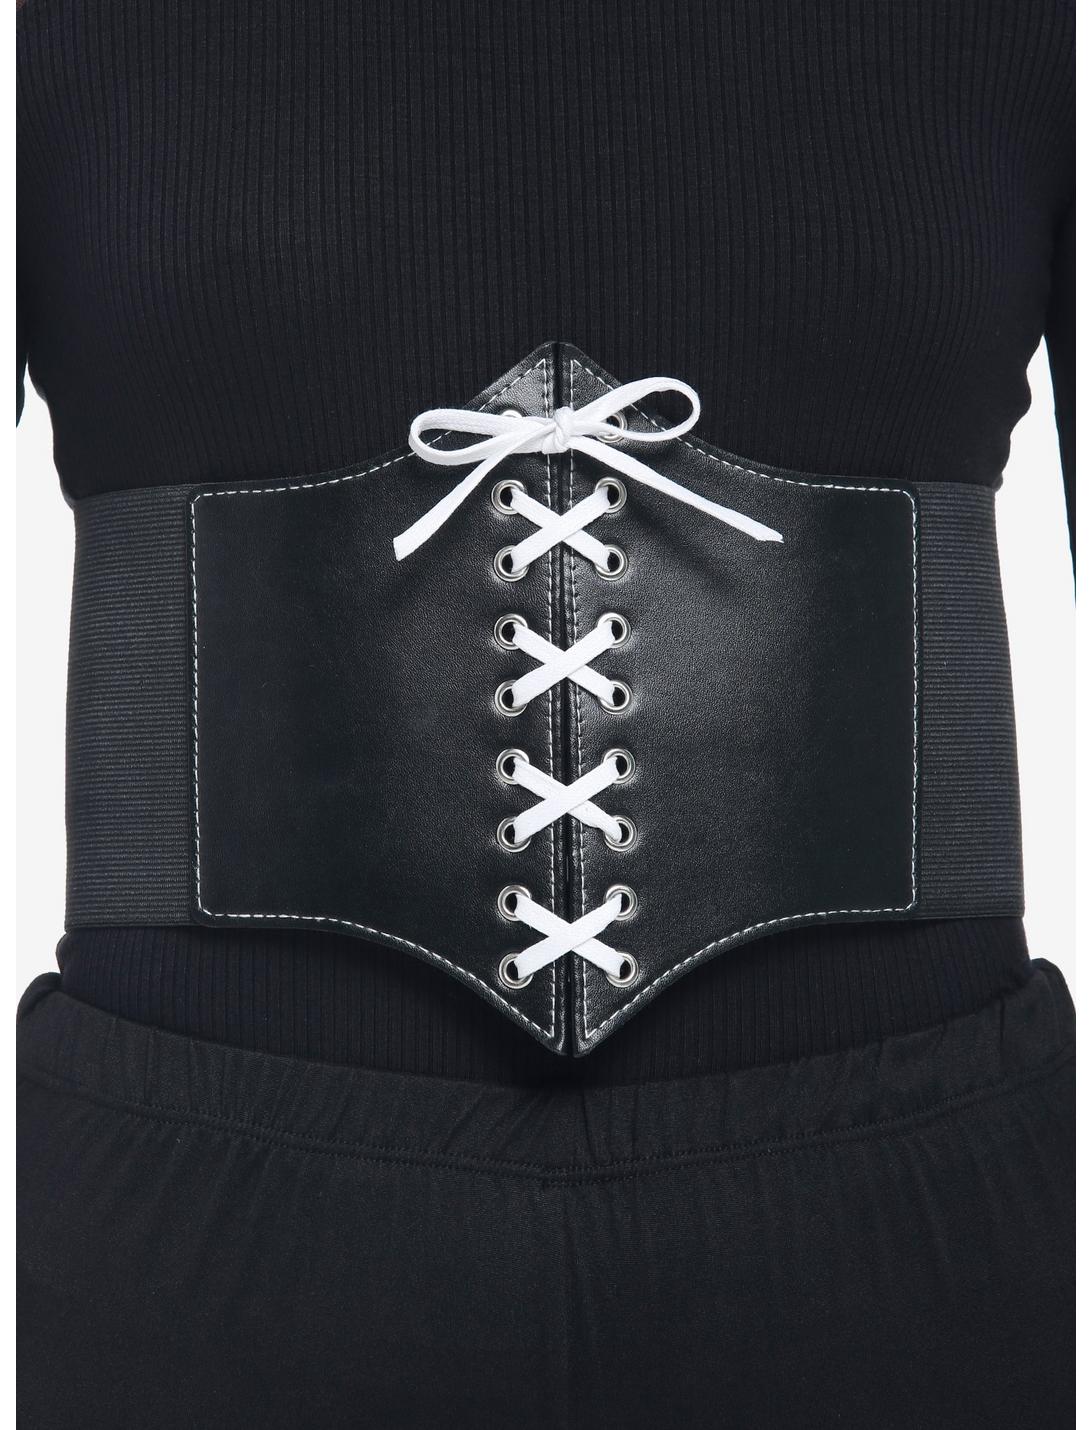 Black & White Lace-Up Corset | Hot Topic